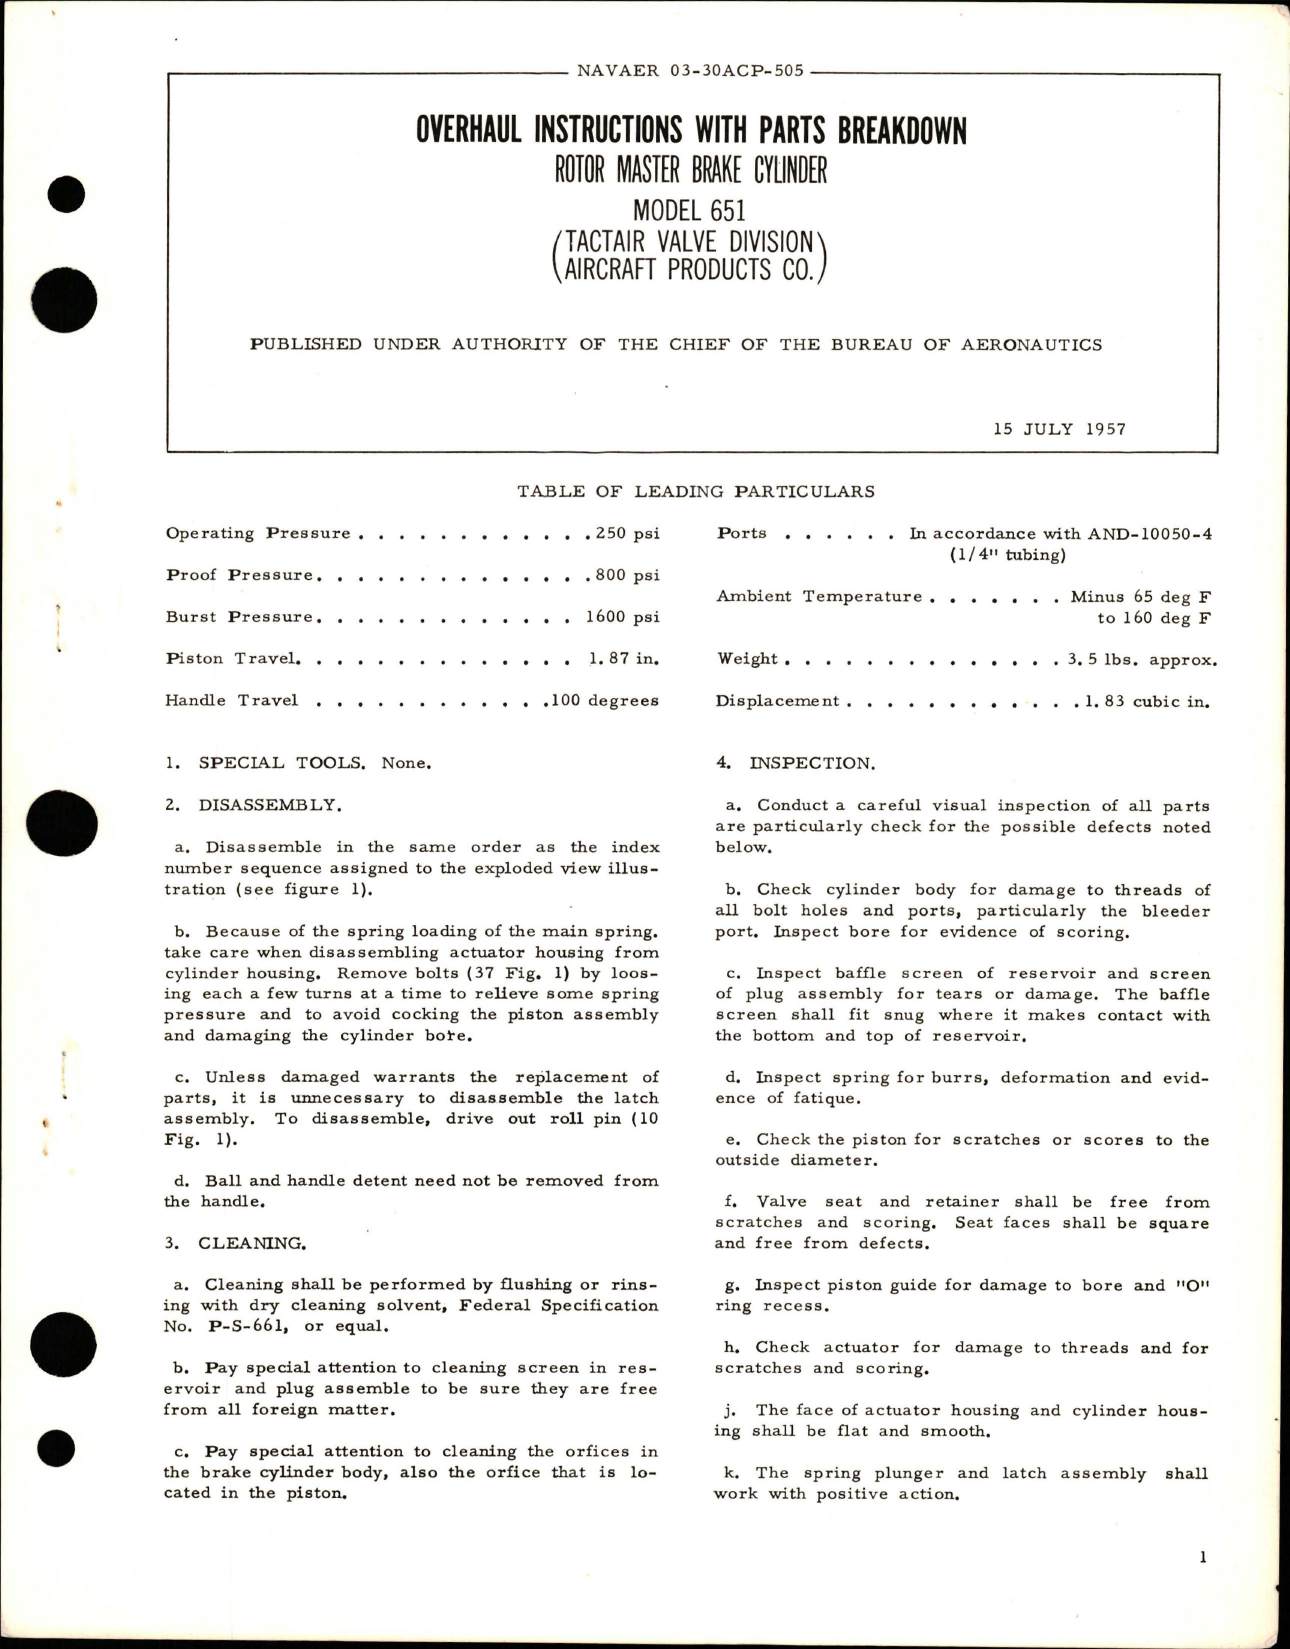 Sample page 1 from AirCorps Library document: Overhaul Instructions with Parts Breakdown for Rotor Master Brake Cylinder - Model 651